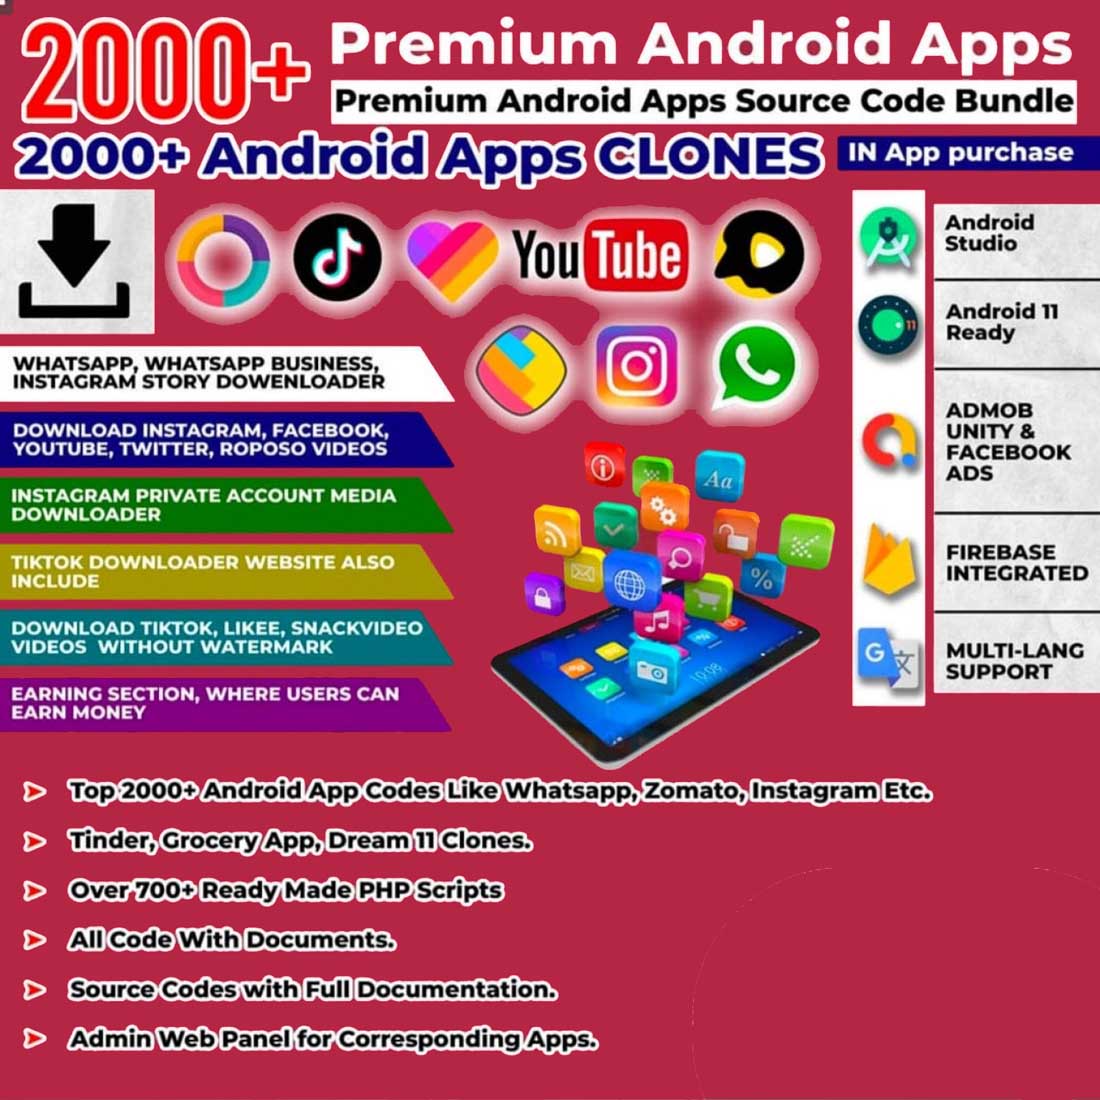 2000+ Android Apps Source Code cover image.